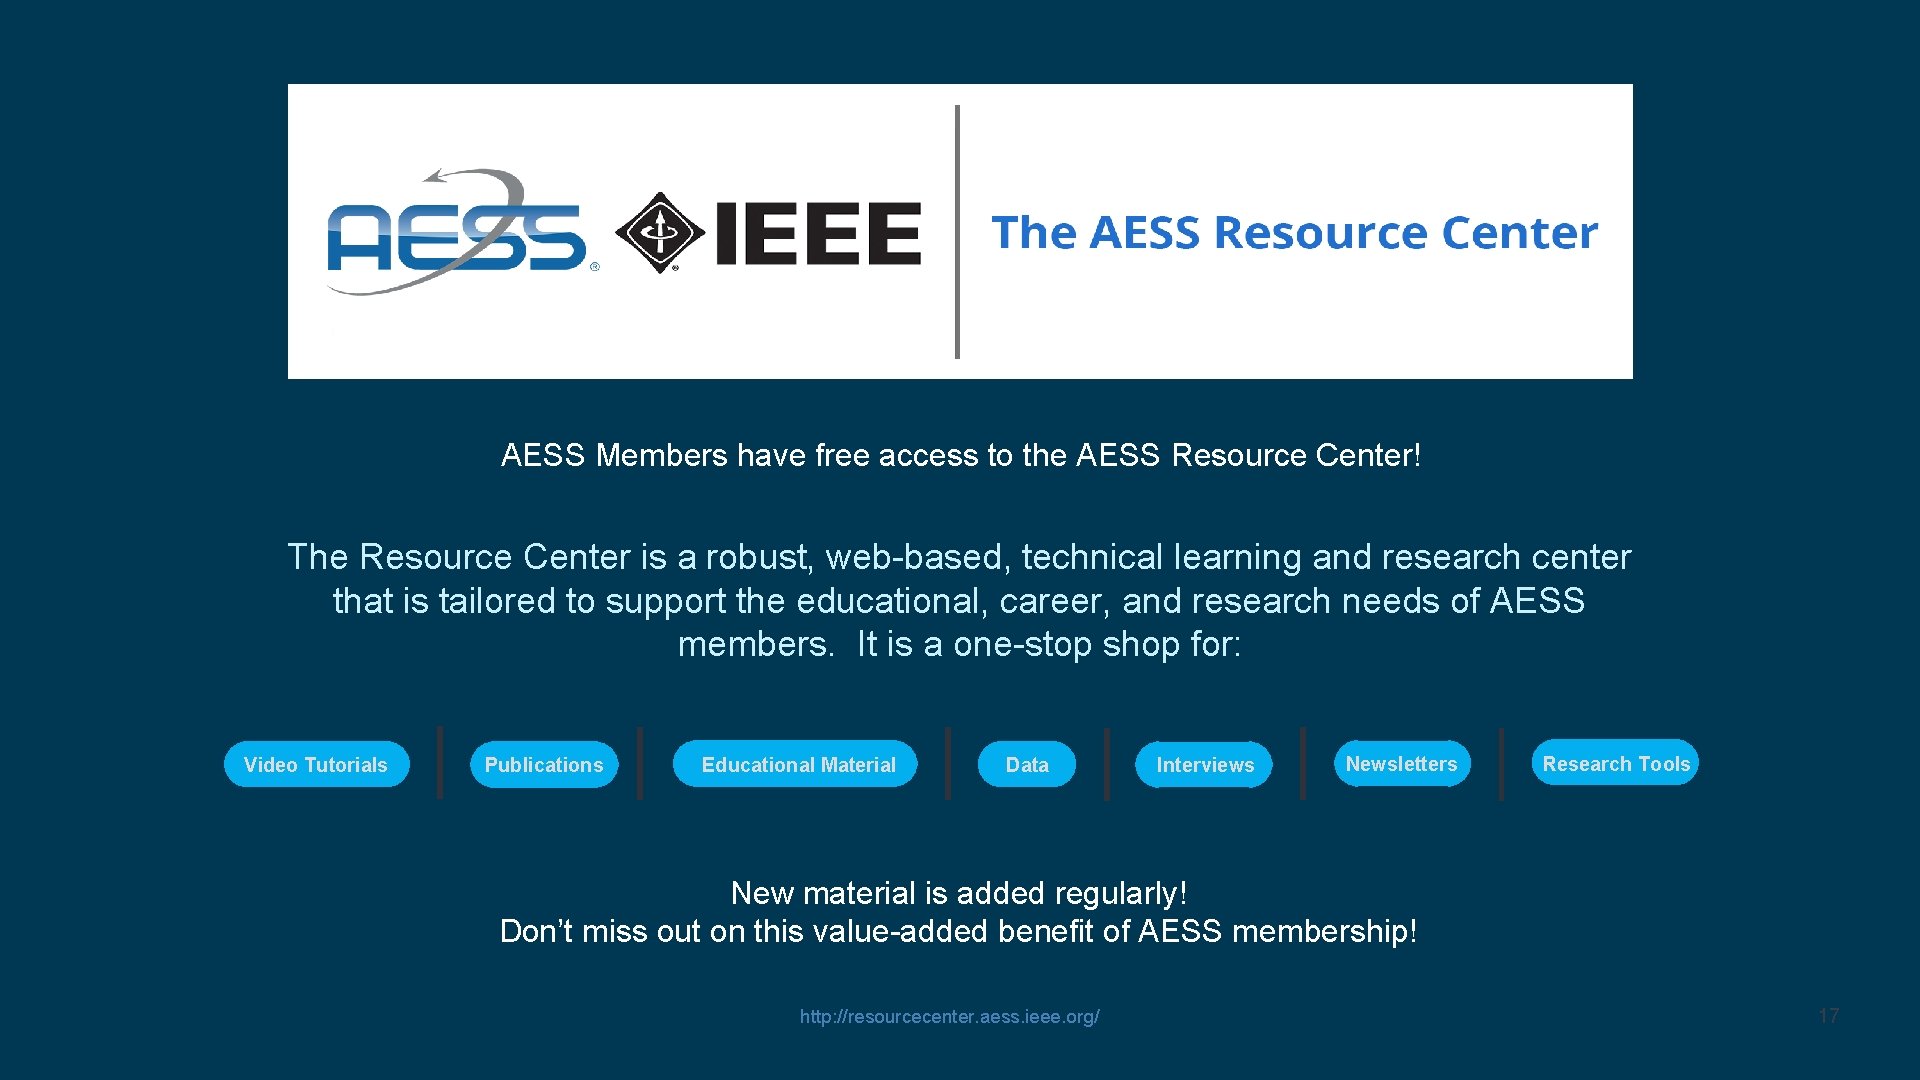 AESS Members have free access to the AESS Resource Center! The Resource Center is